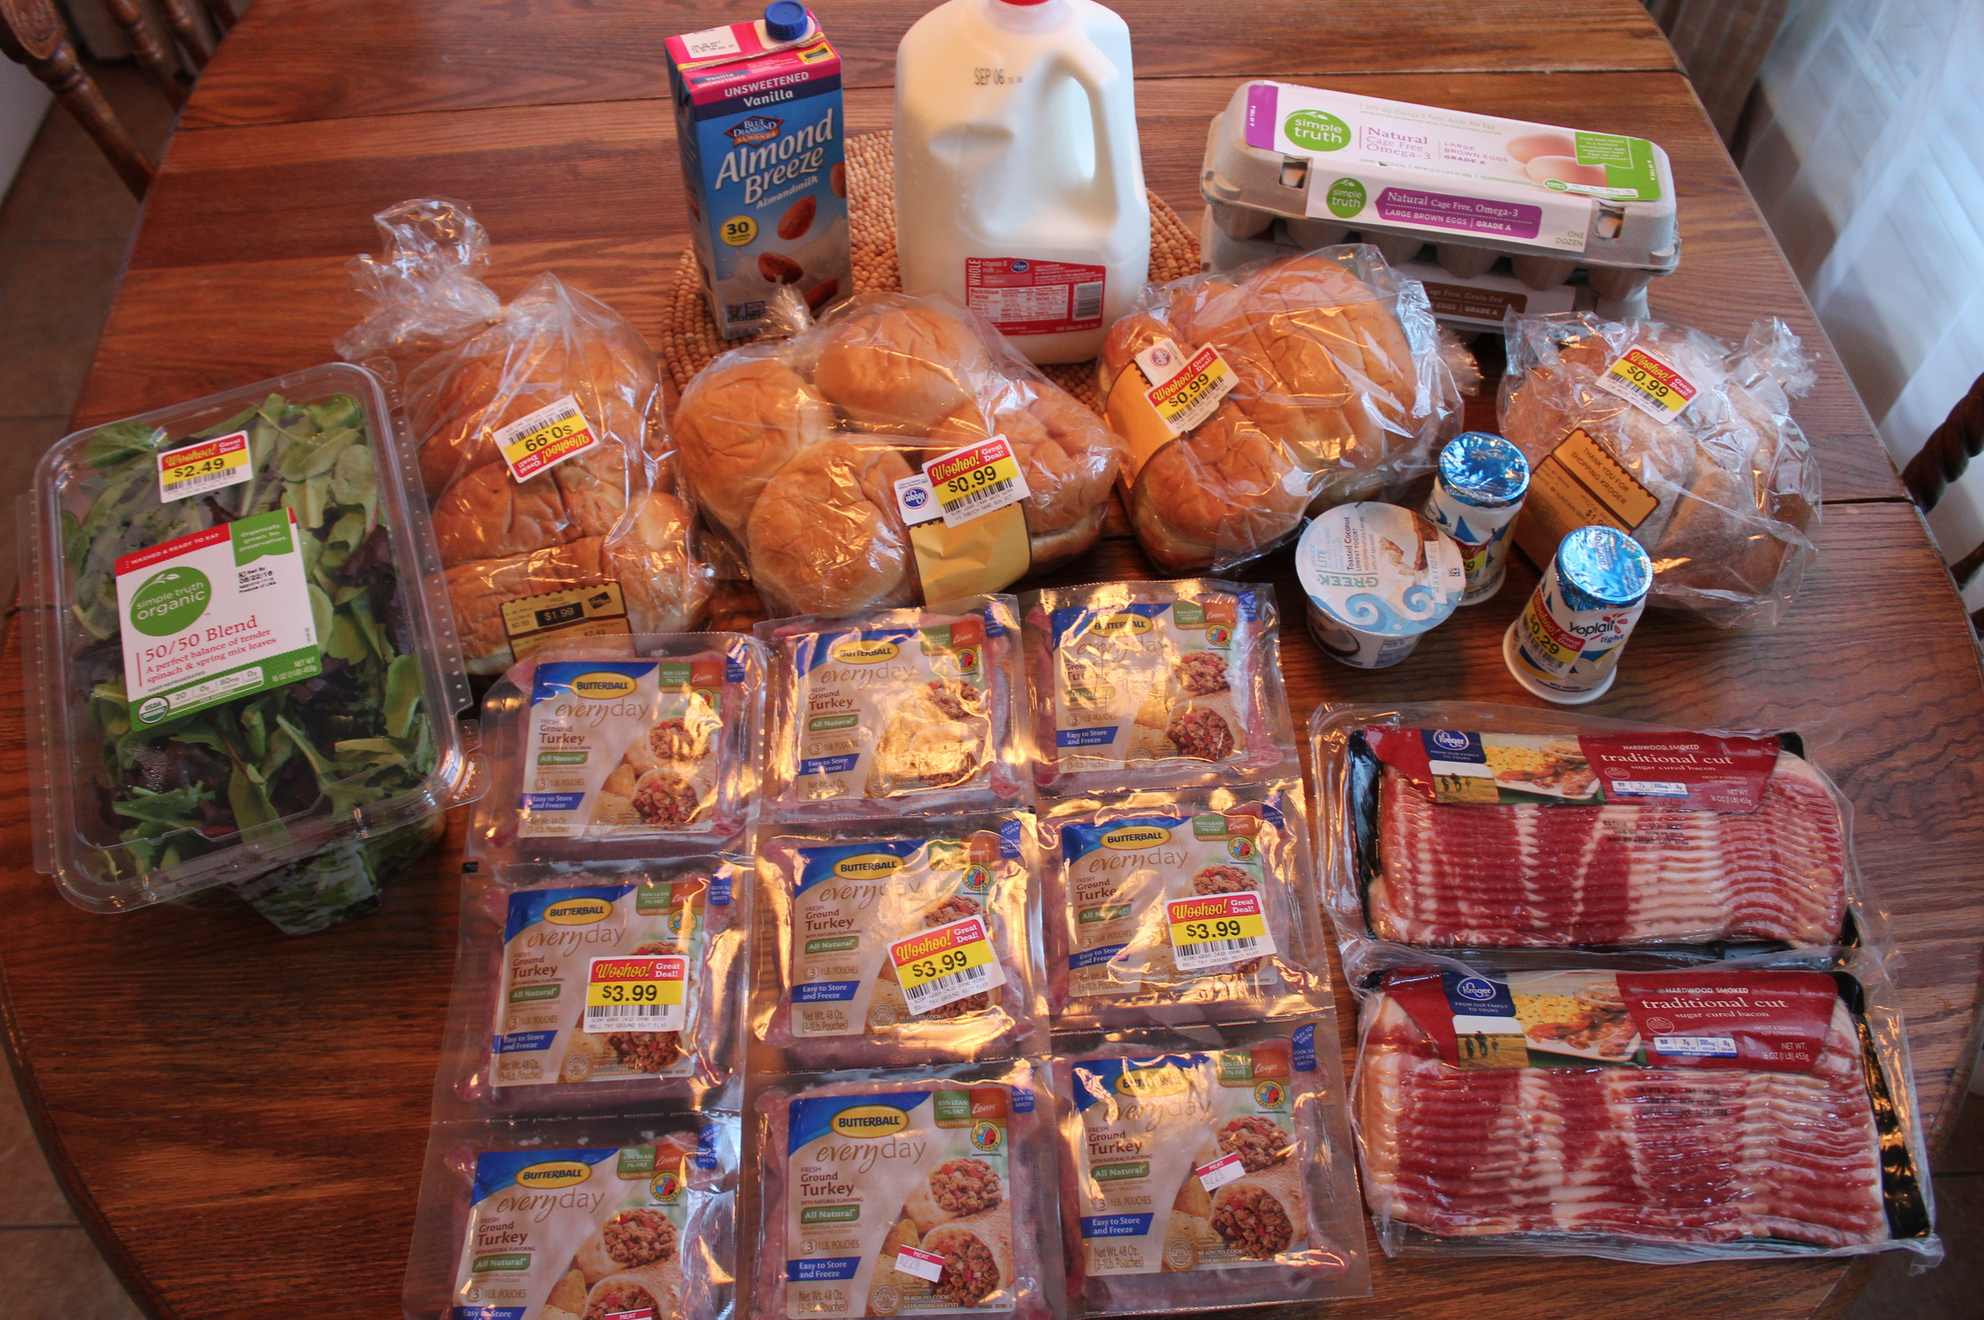 This Week's $80 Grocery Shopping Trip